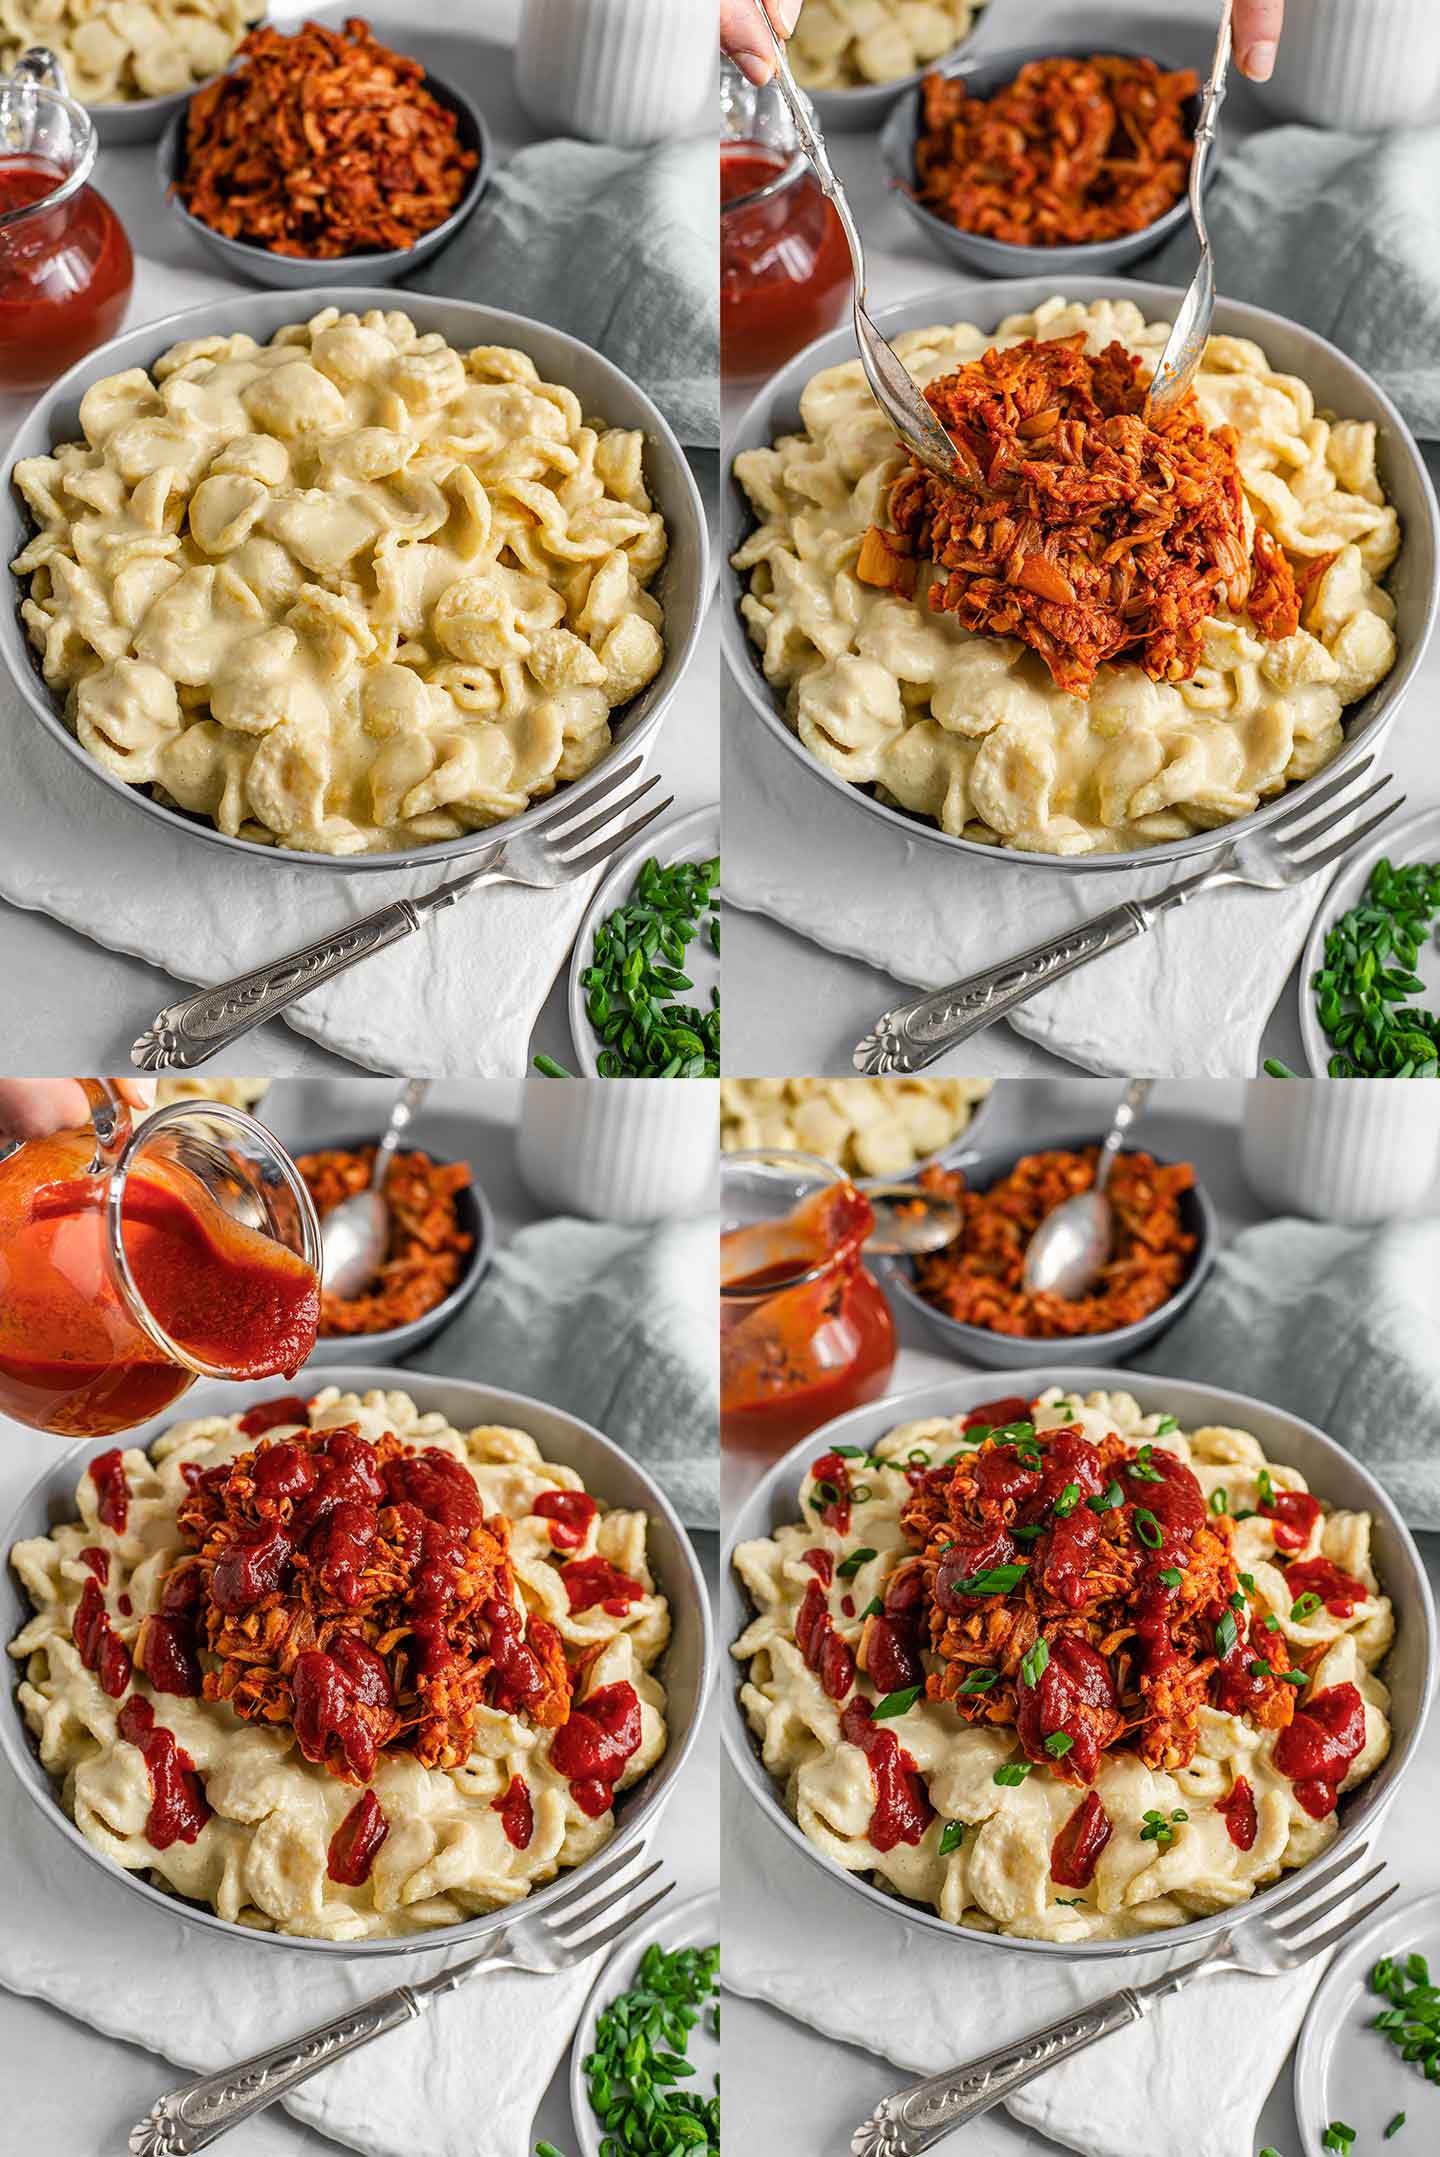 Grid of 4 photos of plating jackfruit mac and cheese. The noodles are covered in creamy sauce, the jackfruit is spooned on top, more BBQ sauce is drizzled, breadcrumbs and green onion garnish.